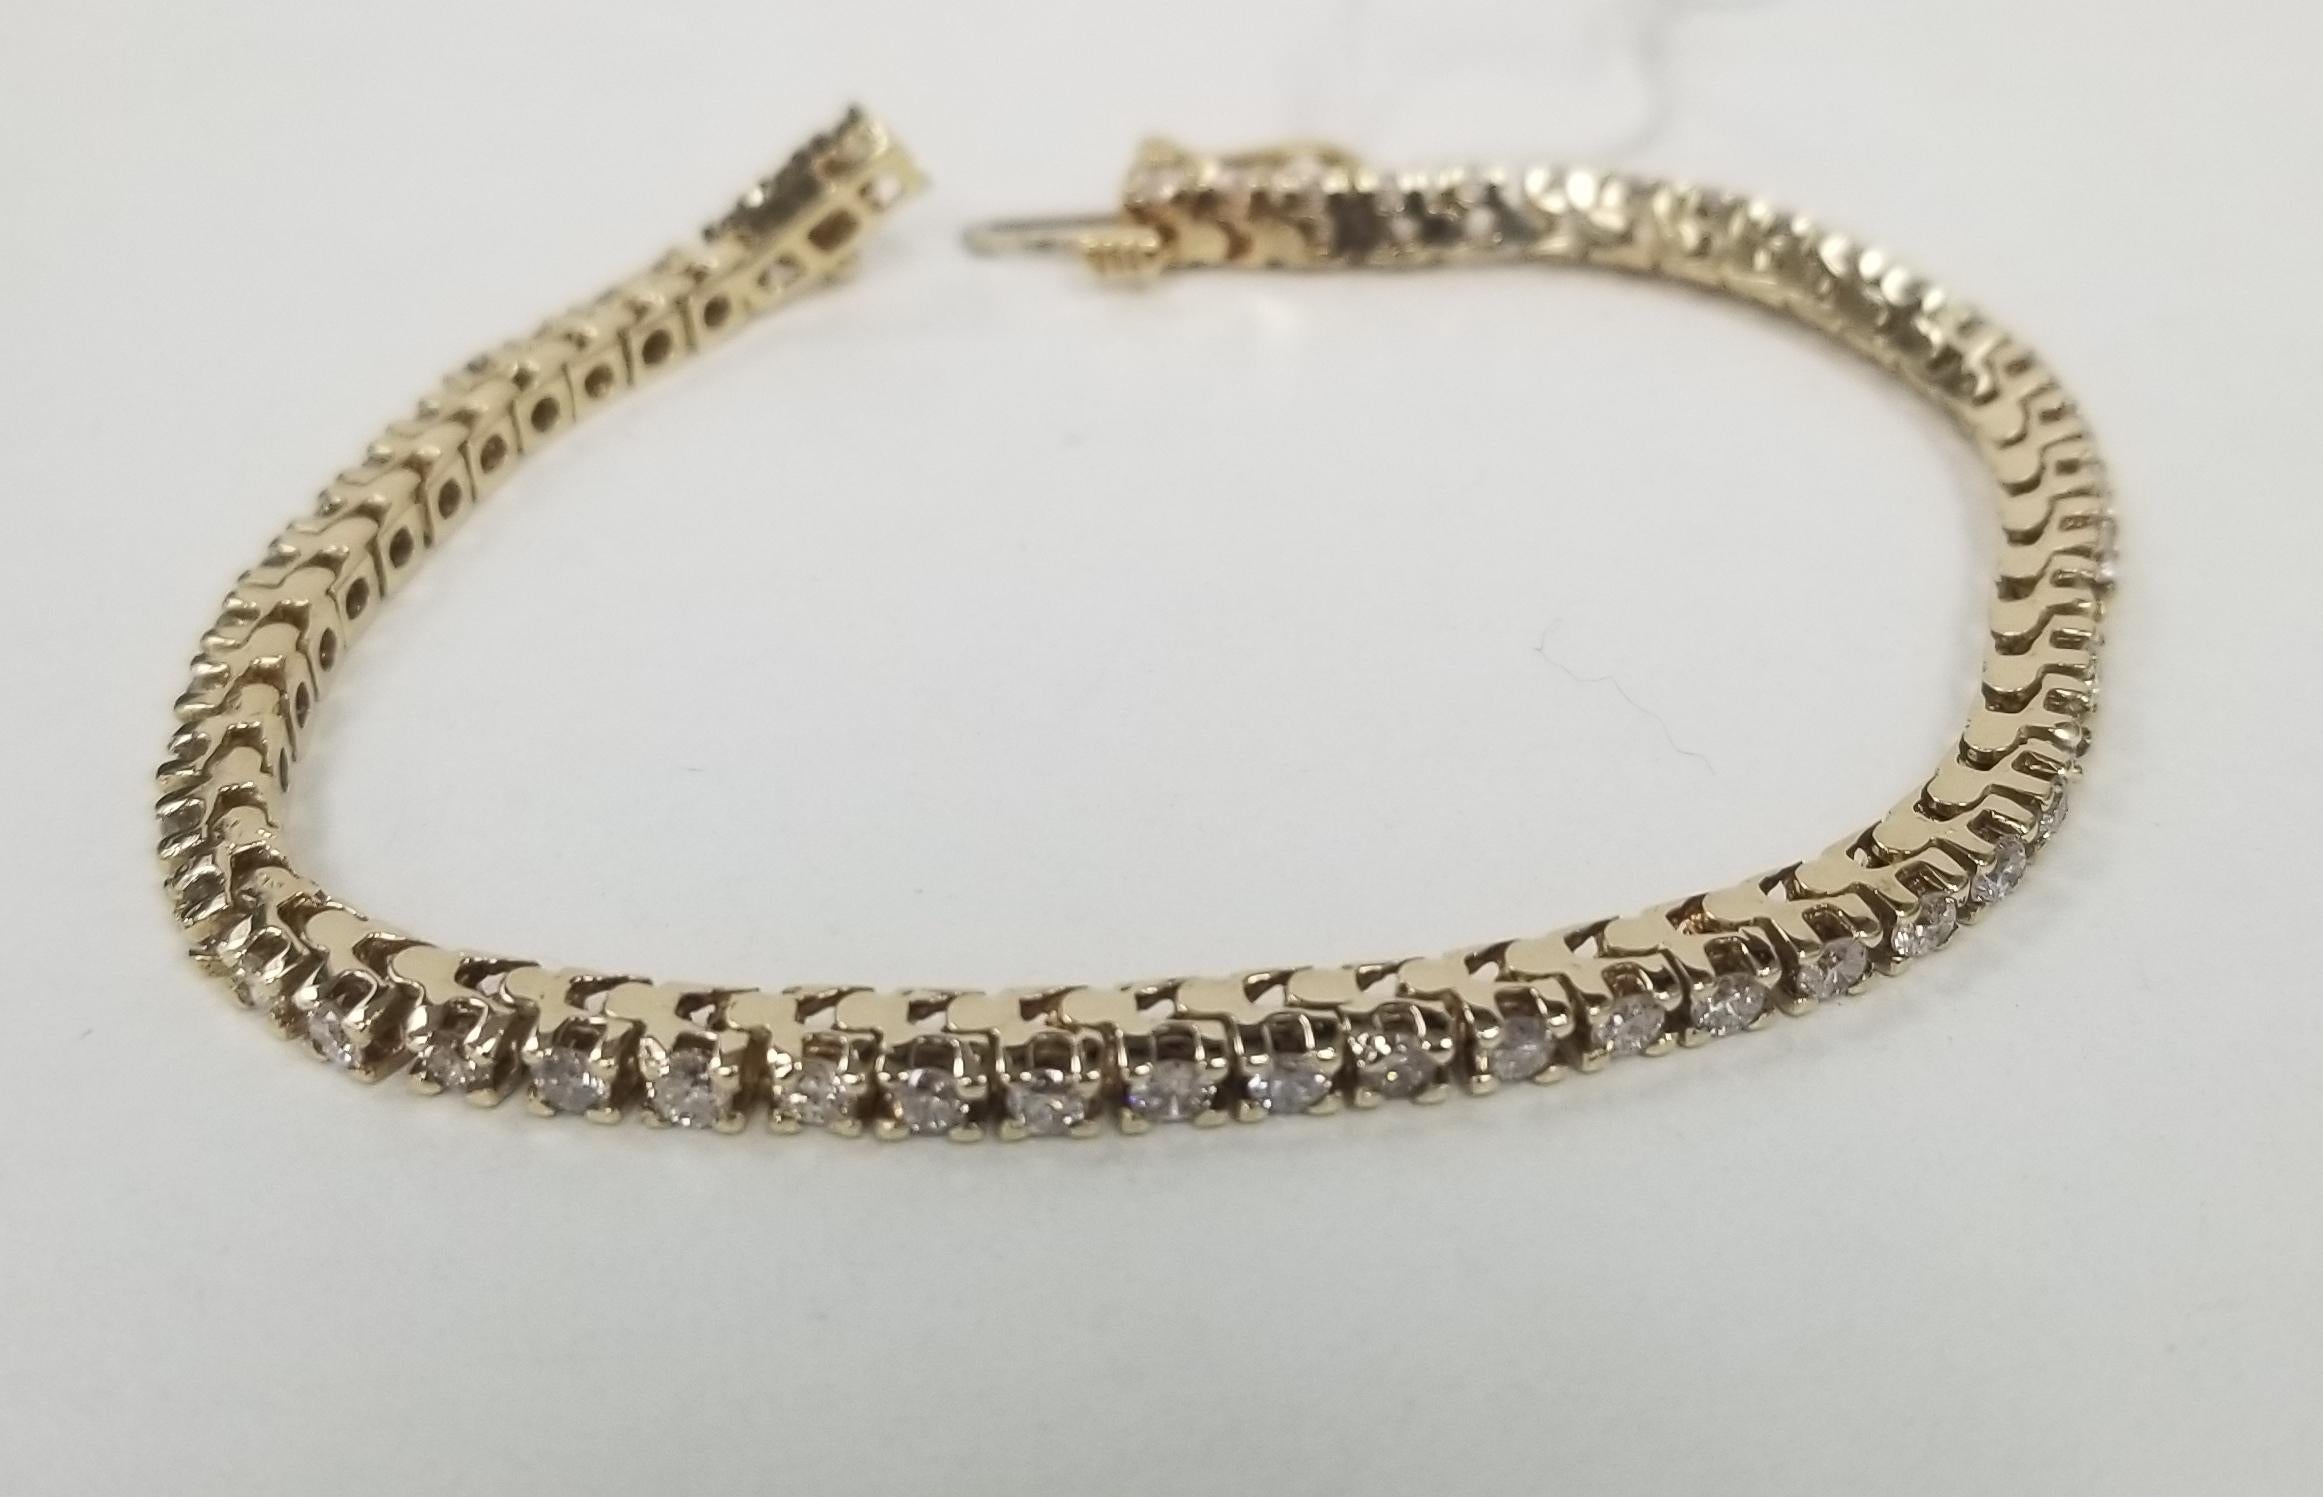 This is very beautiful 14k yellow gold classic box custom diamond tennis bracelet with 53 round diamonds color F-G and clarity VS2 weighing 2.50cts. very fine quality diamonds, bracelet measures 6.5 inches with clasp and safety.
Specifications:
main